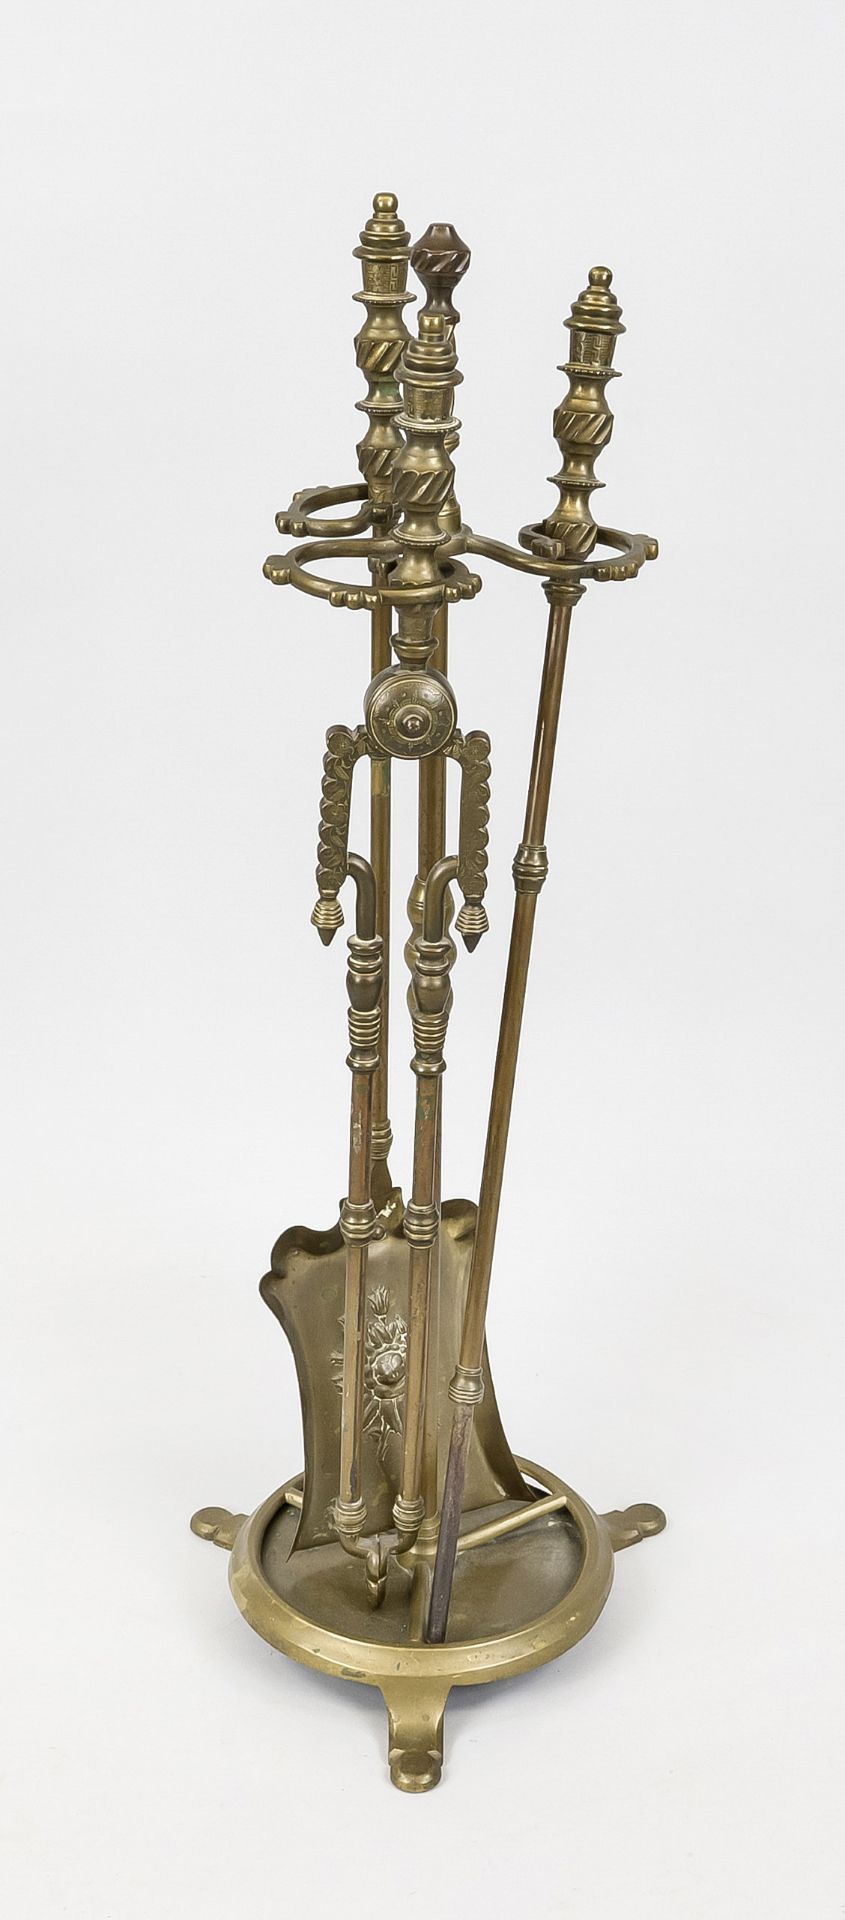 Fireplace set with stand, 19th/20th century, brass/bronze. Set consisting of shovel, tongs and